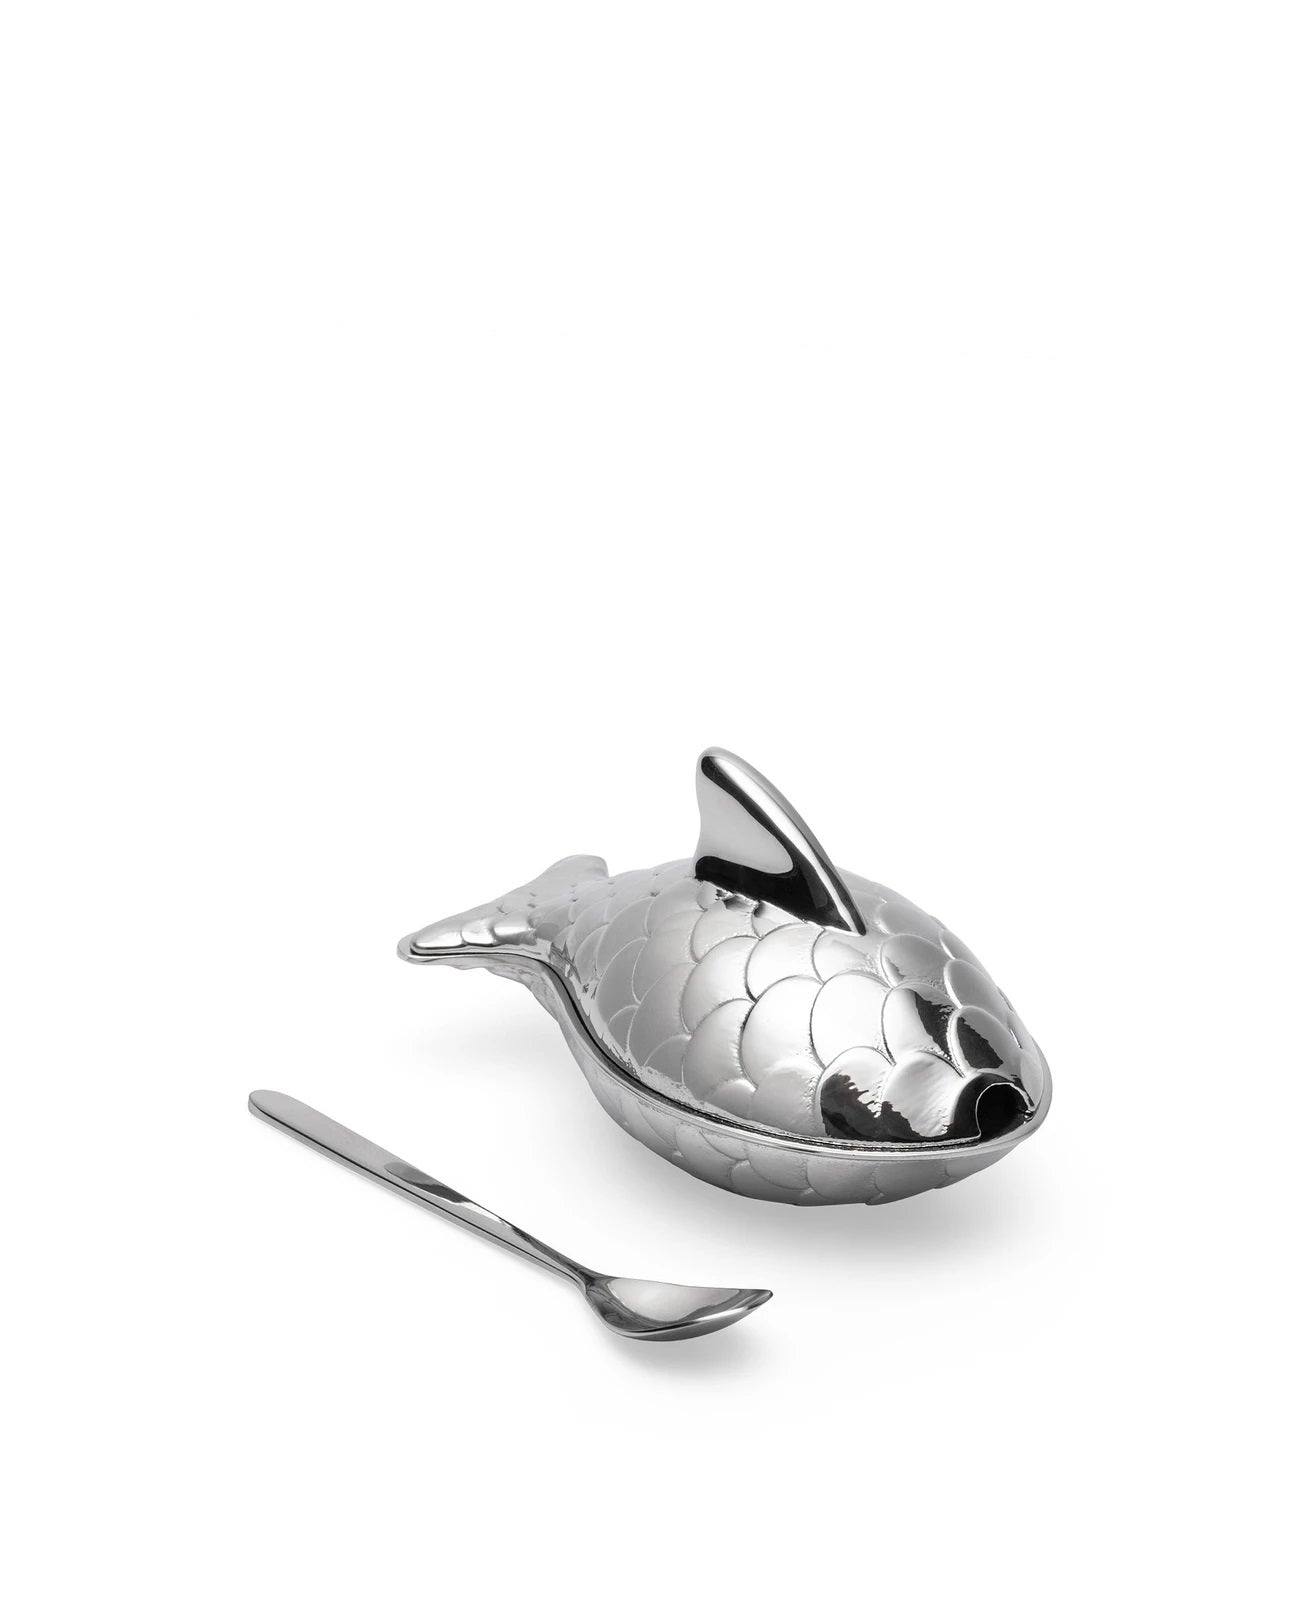 Alessi Colombina Fish, salt shaker with spoon